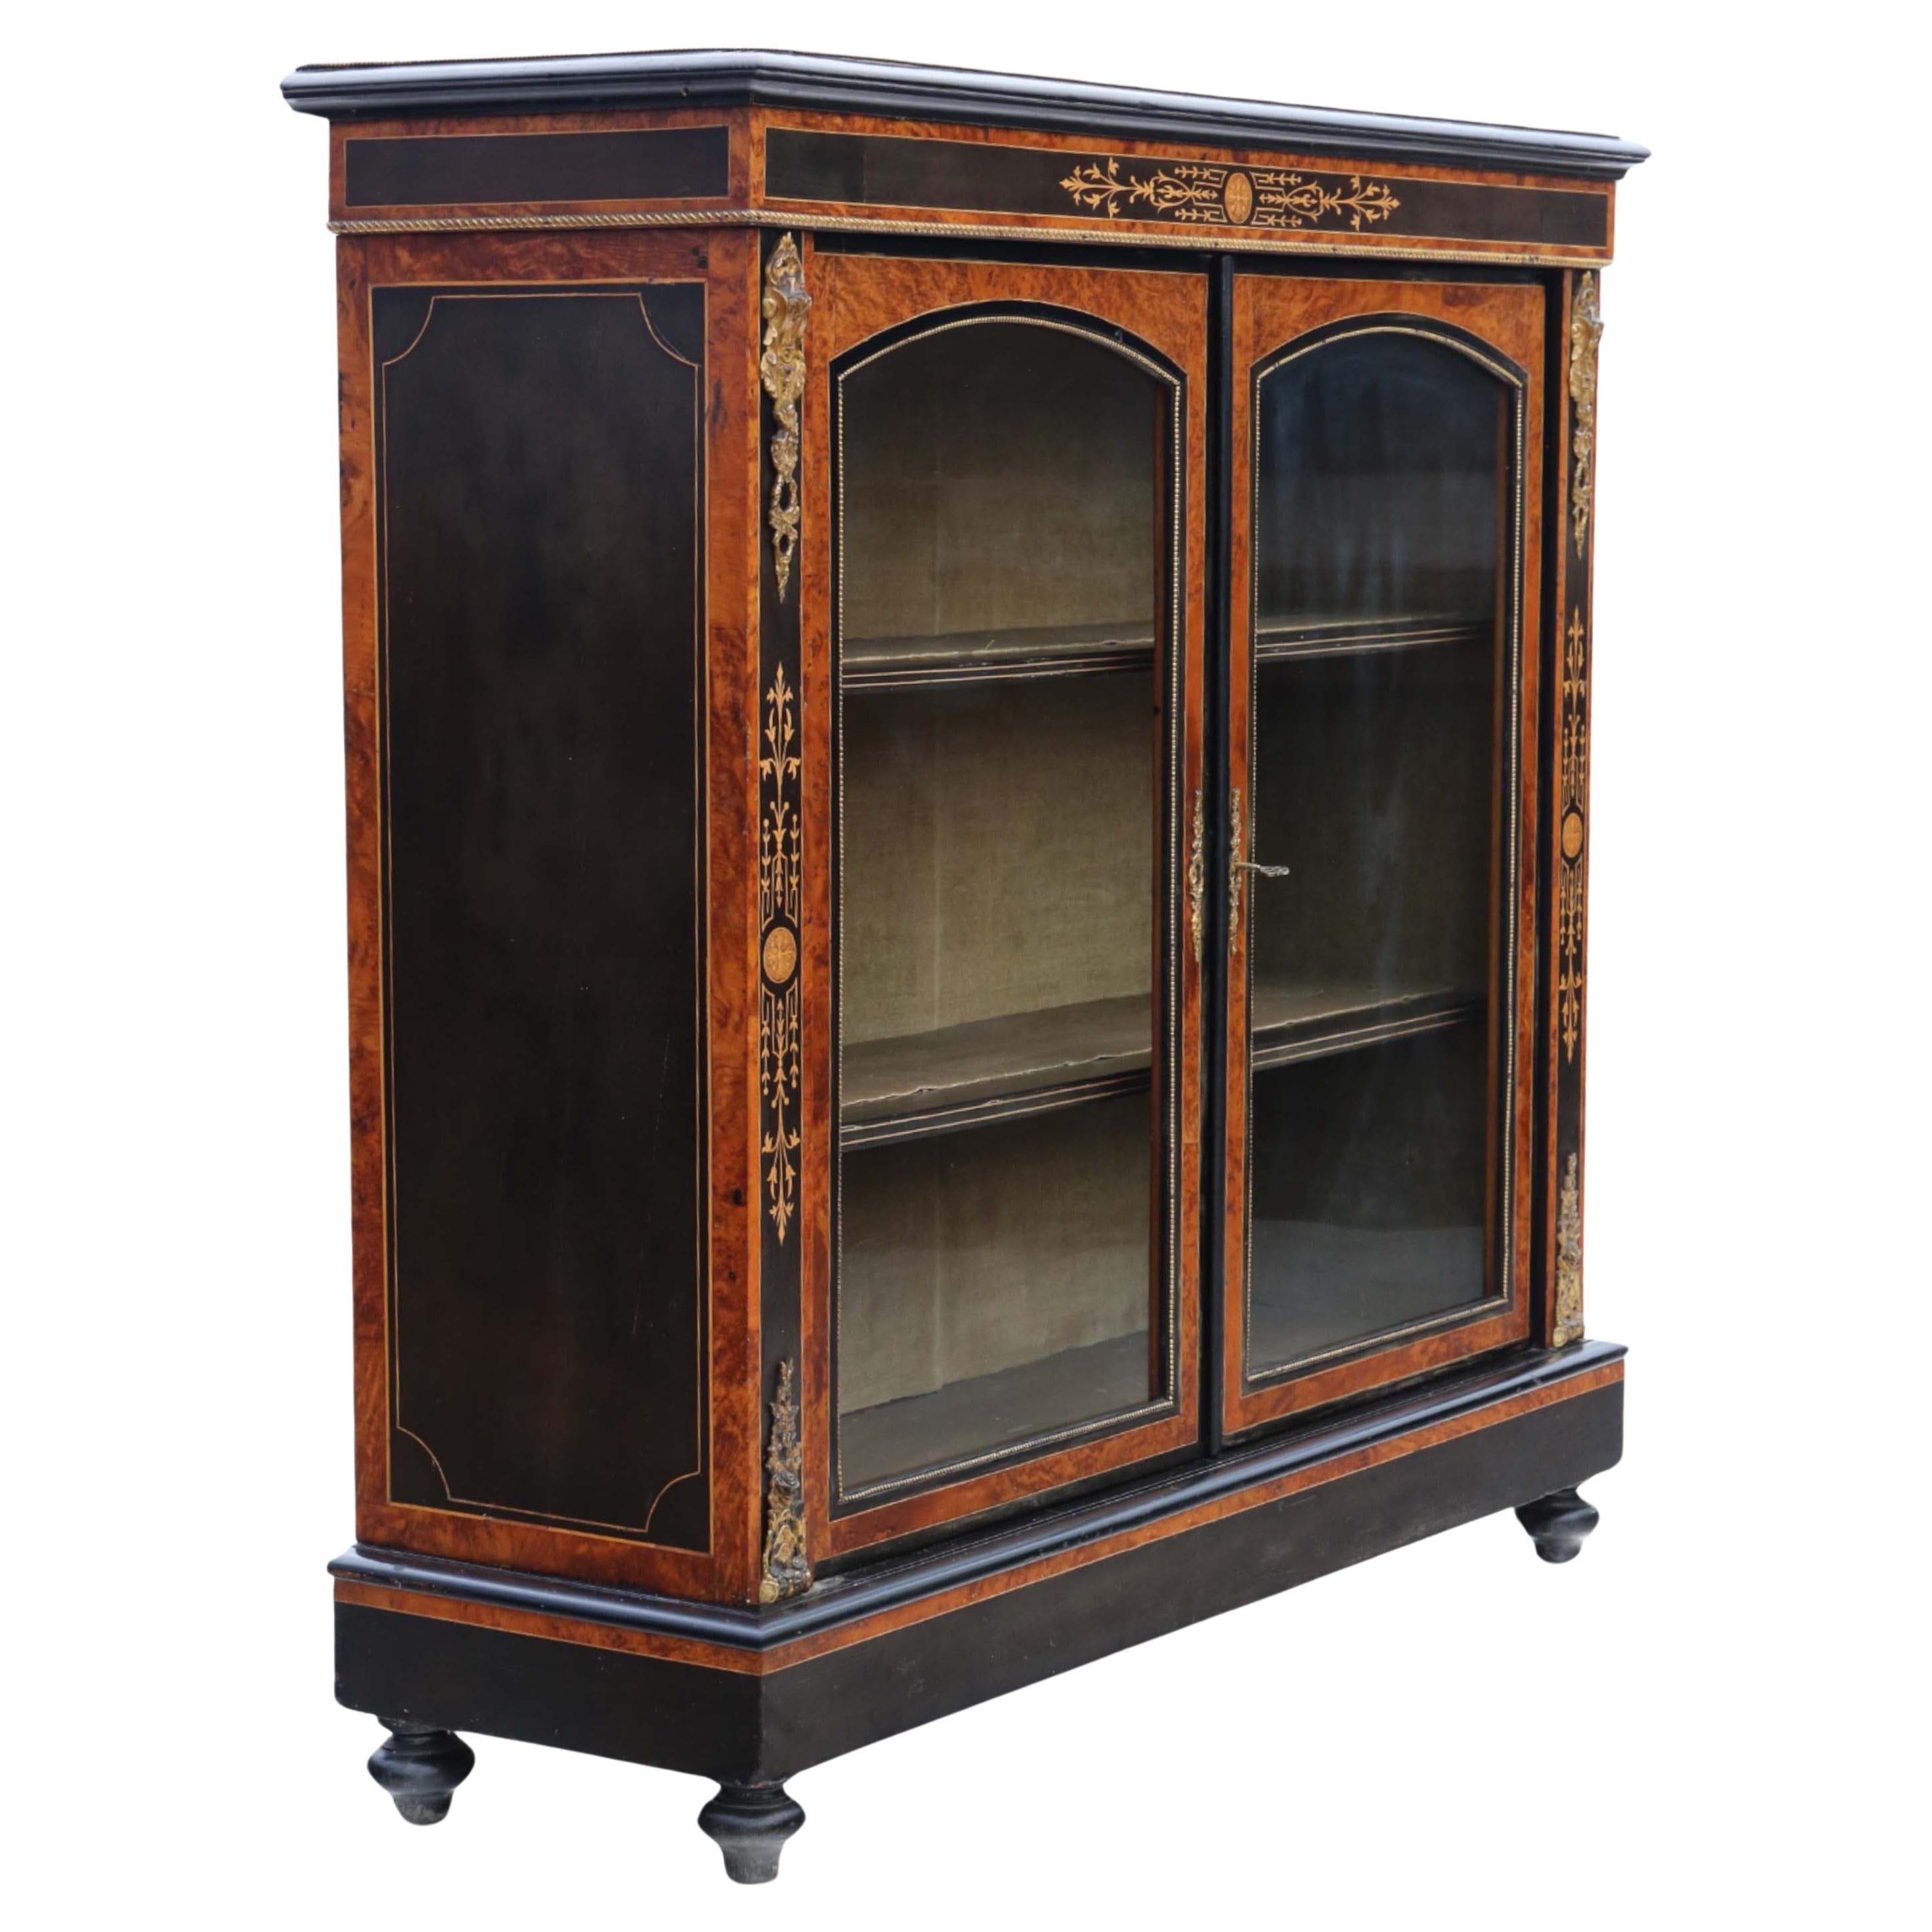 Antique C1880 large quality inlaid burr walnut display cabinet For Sale